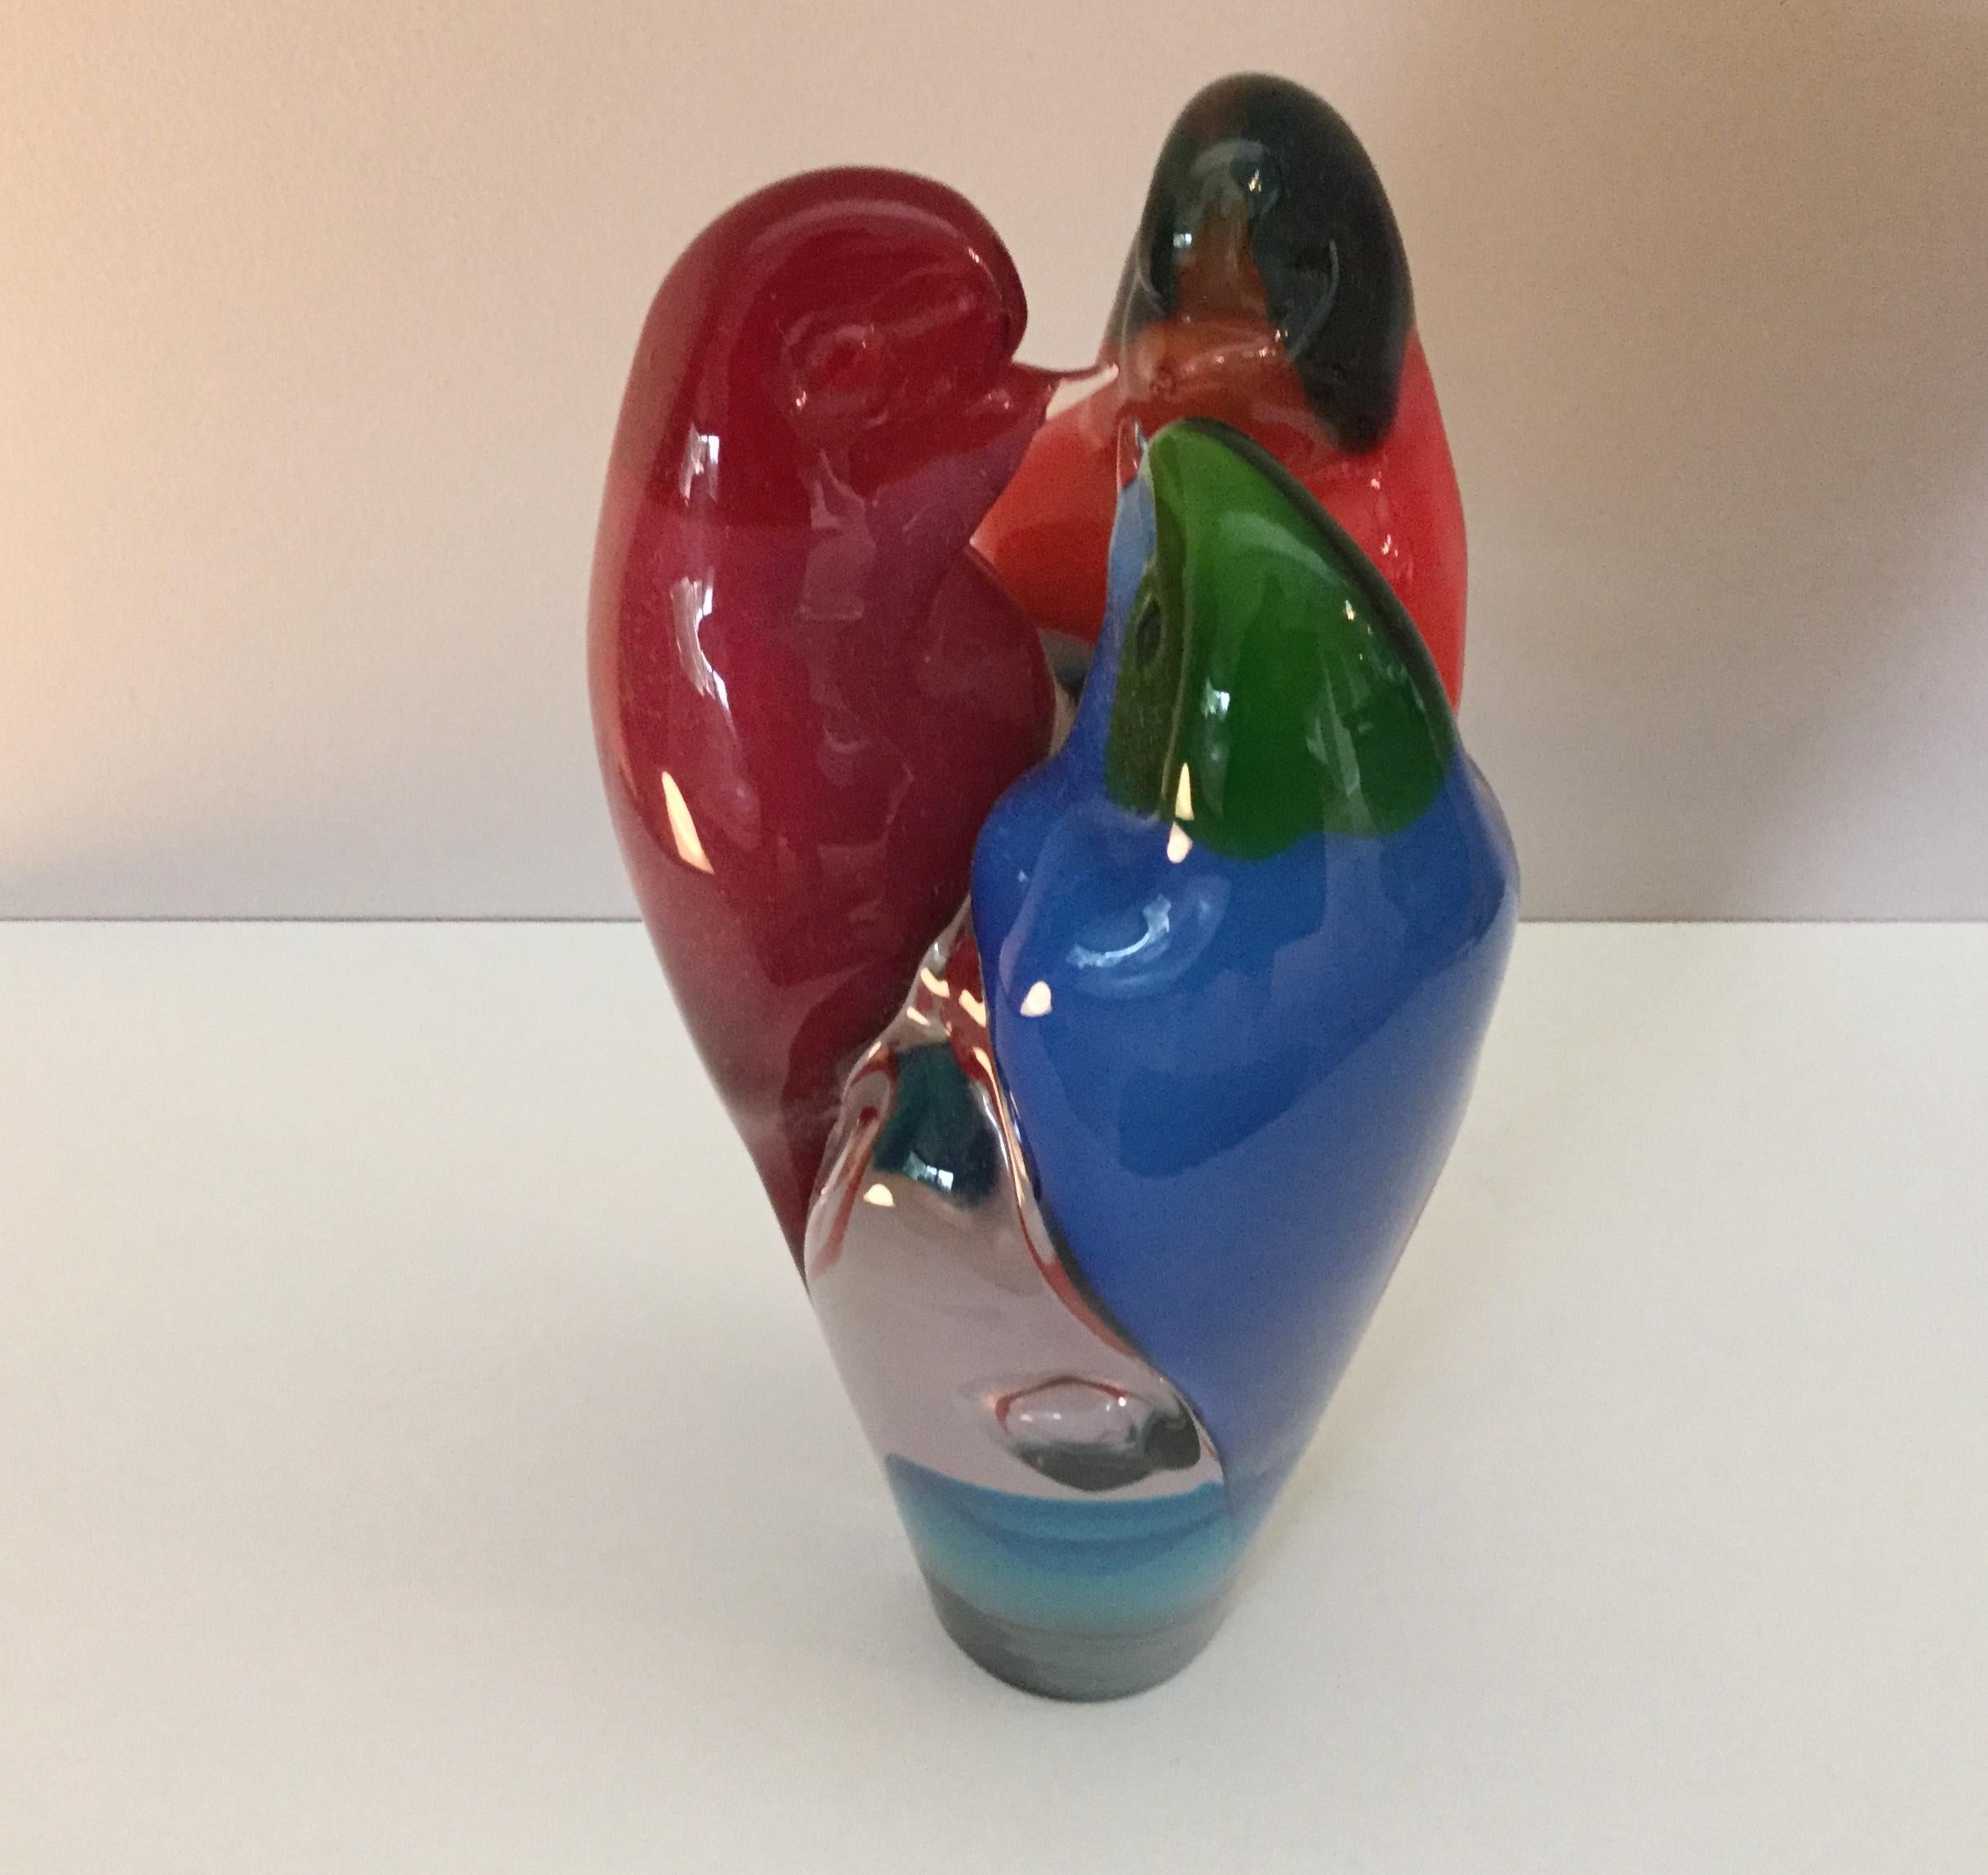 Signed and dated vibrant Murano sculpture by Alberto Toso for Cenedese.